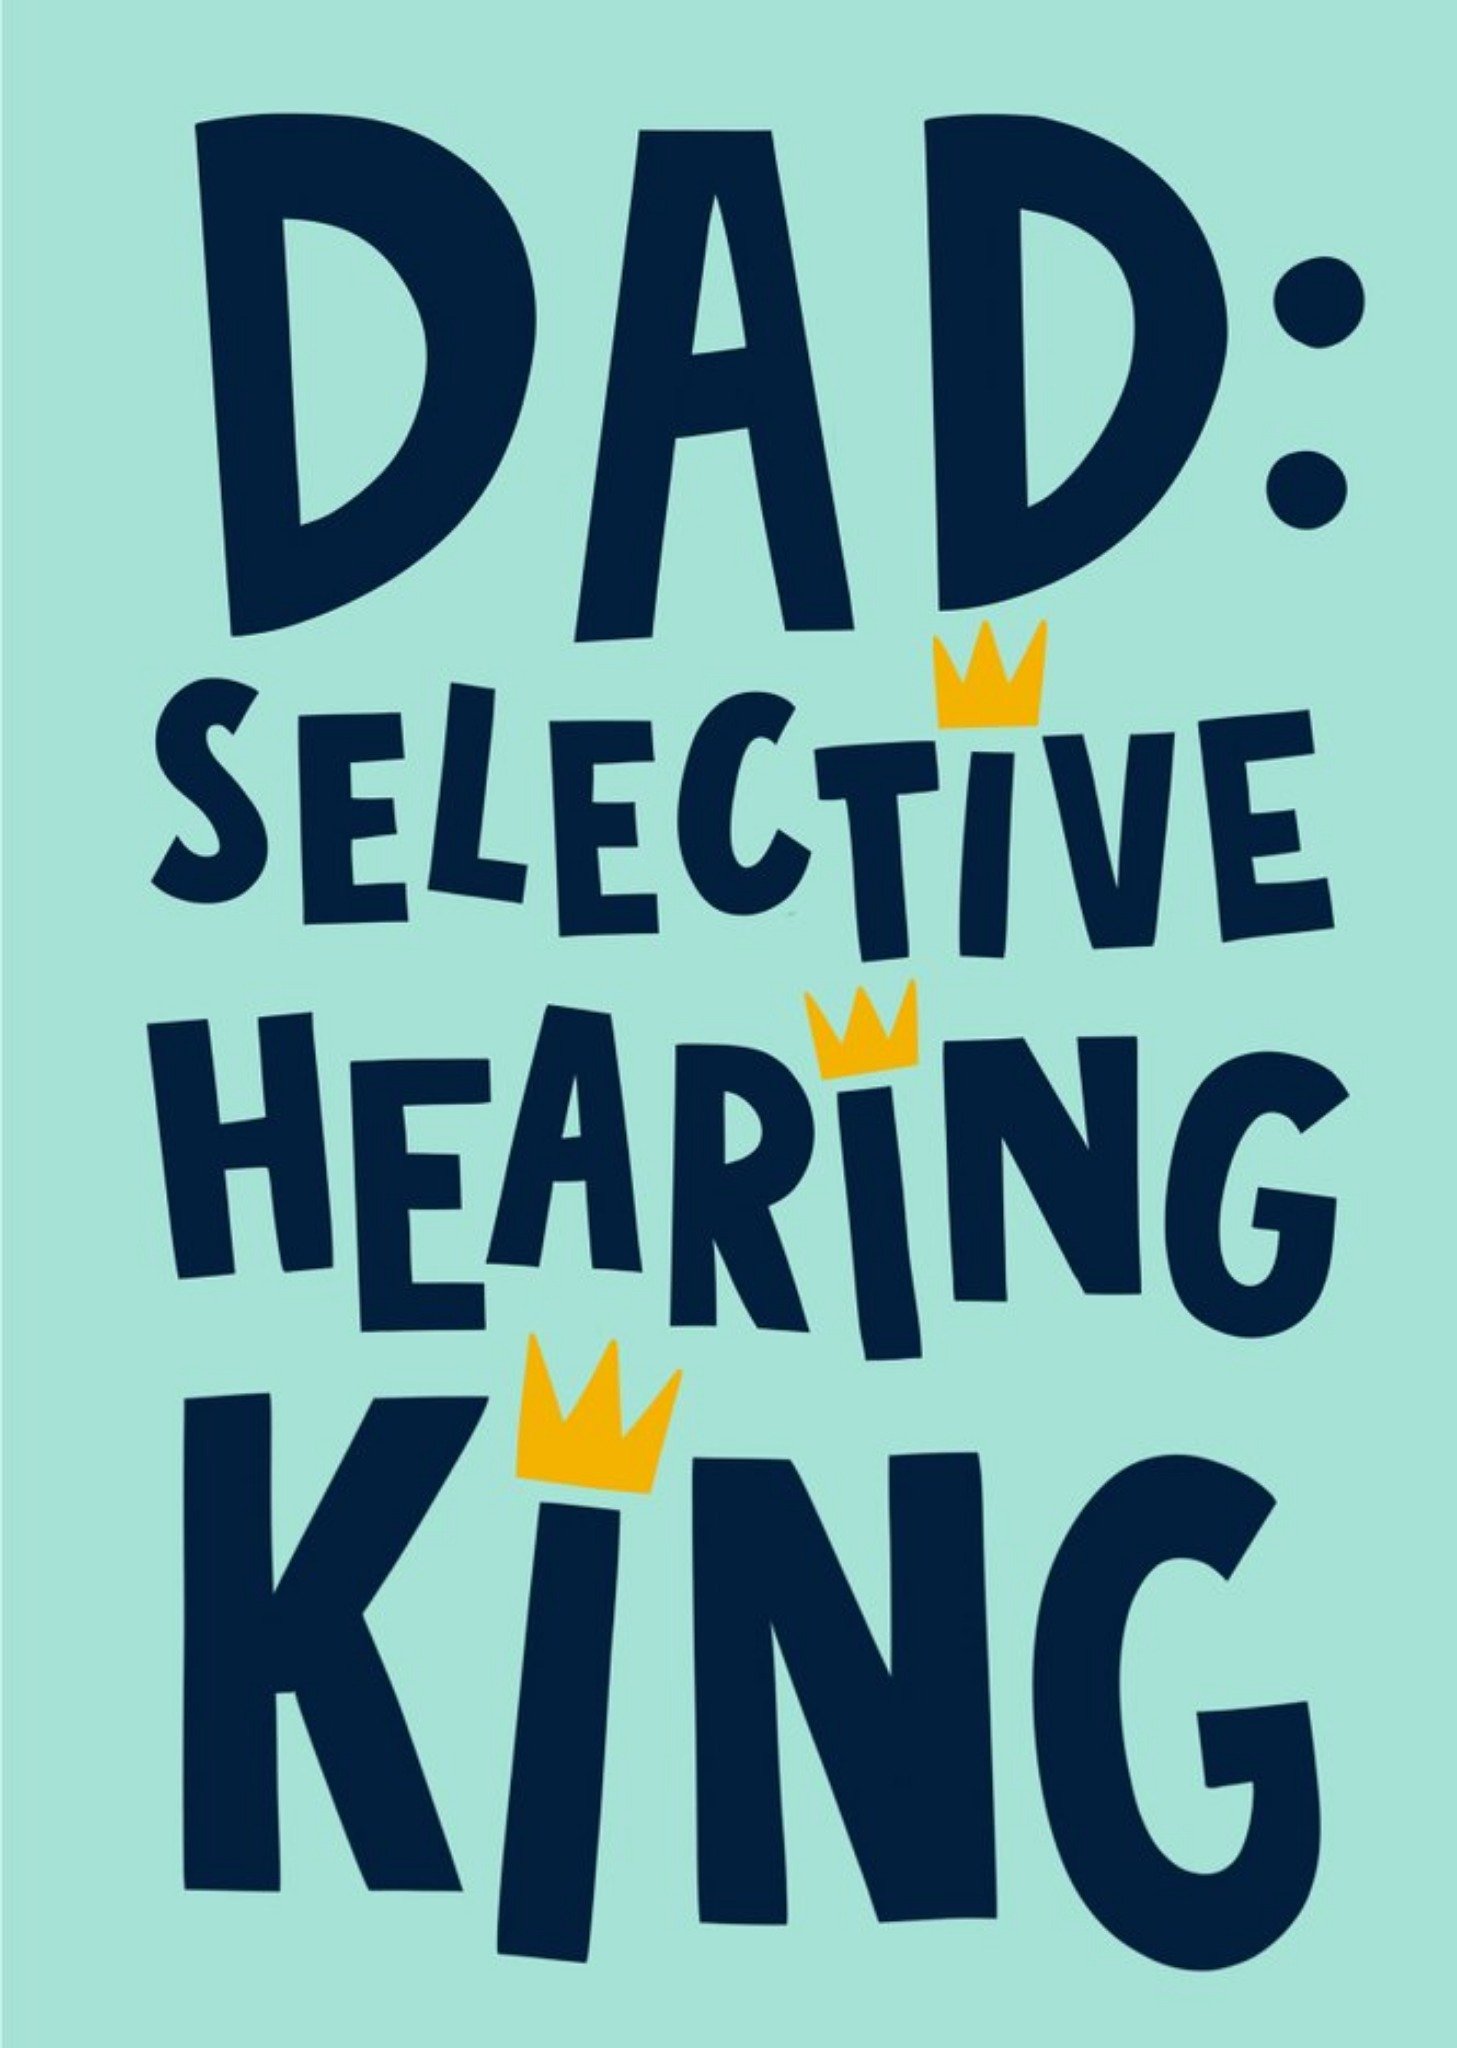 Moonpig Selective Hearing King Father's Day Card, Large